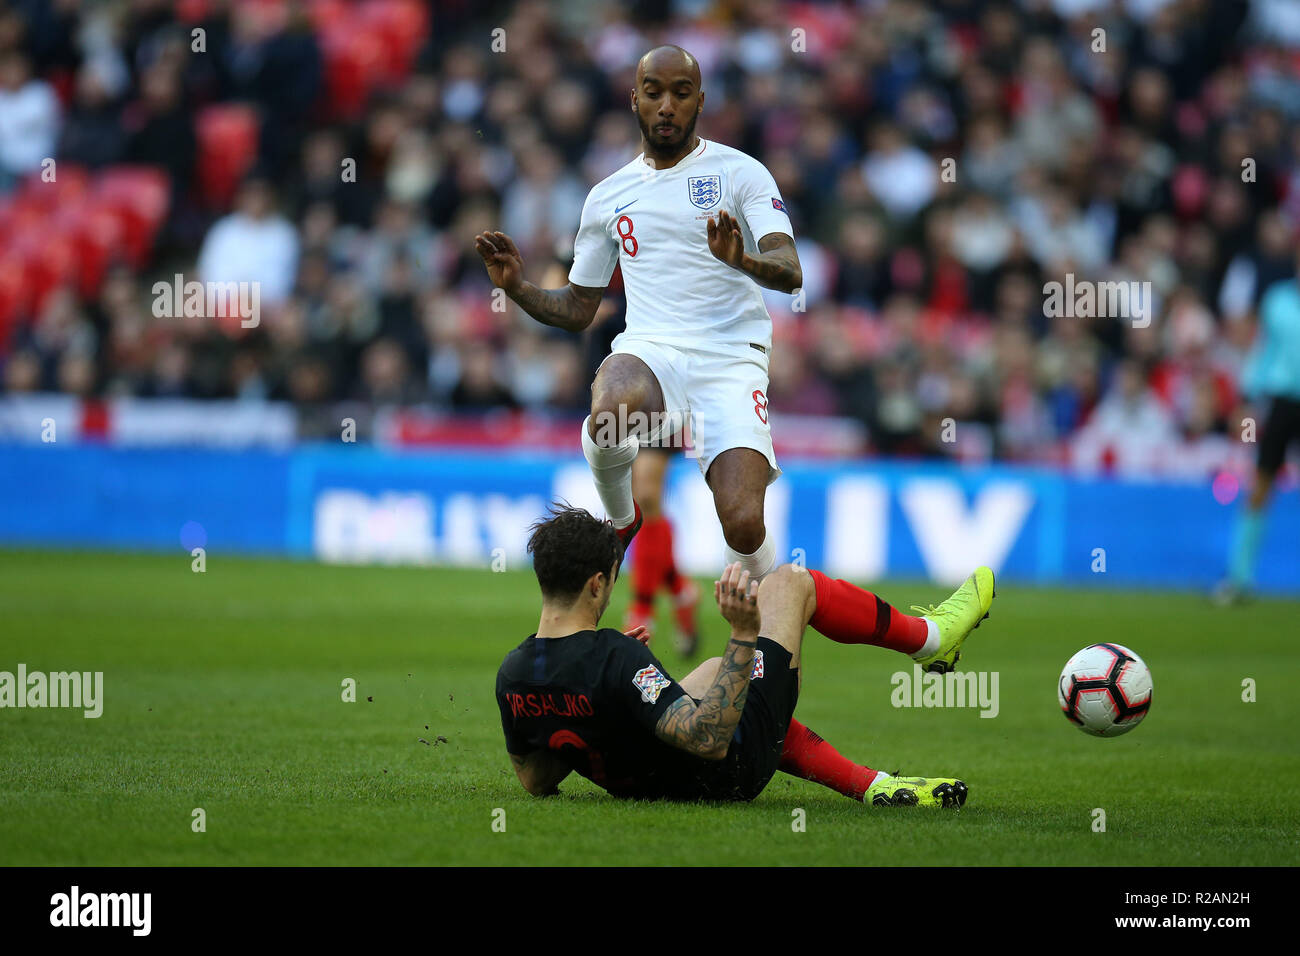 London, UK. 18th November 2018. London, UK. 18th November 2018. Fabian Delph of England is tackled by Sime Vrsaljko of Croatia. UEFA Nations league A, group 4 match, England v Croatia at Wembley Stadium in London on Sunday 18th November 2018.  Please note images are for Editorial Use Only. pic by Andrew Orchard/Alamy Live news Credit: Andrew Orchard sports photography/Alamy Live News Stock Photo